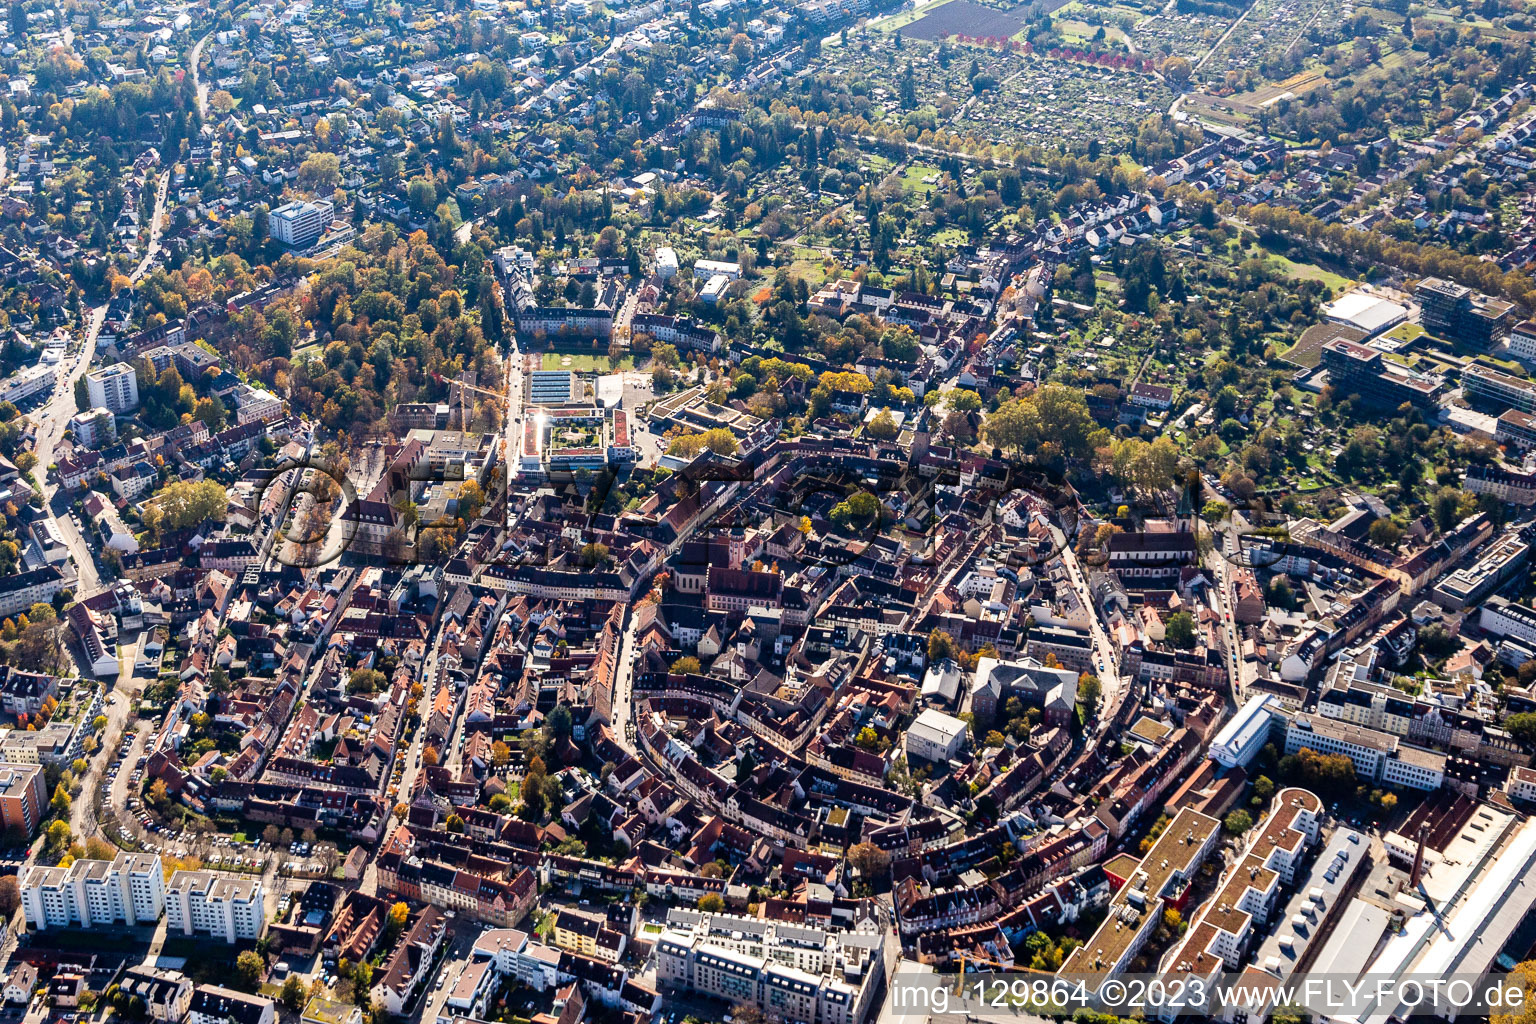 Aerial photograpy of Old Town area and city center in the district Durlach in Karlsruhe in the state Baden-Wuerttemberg